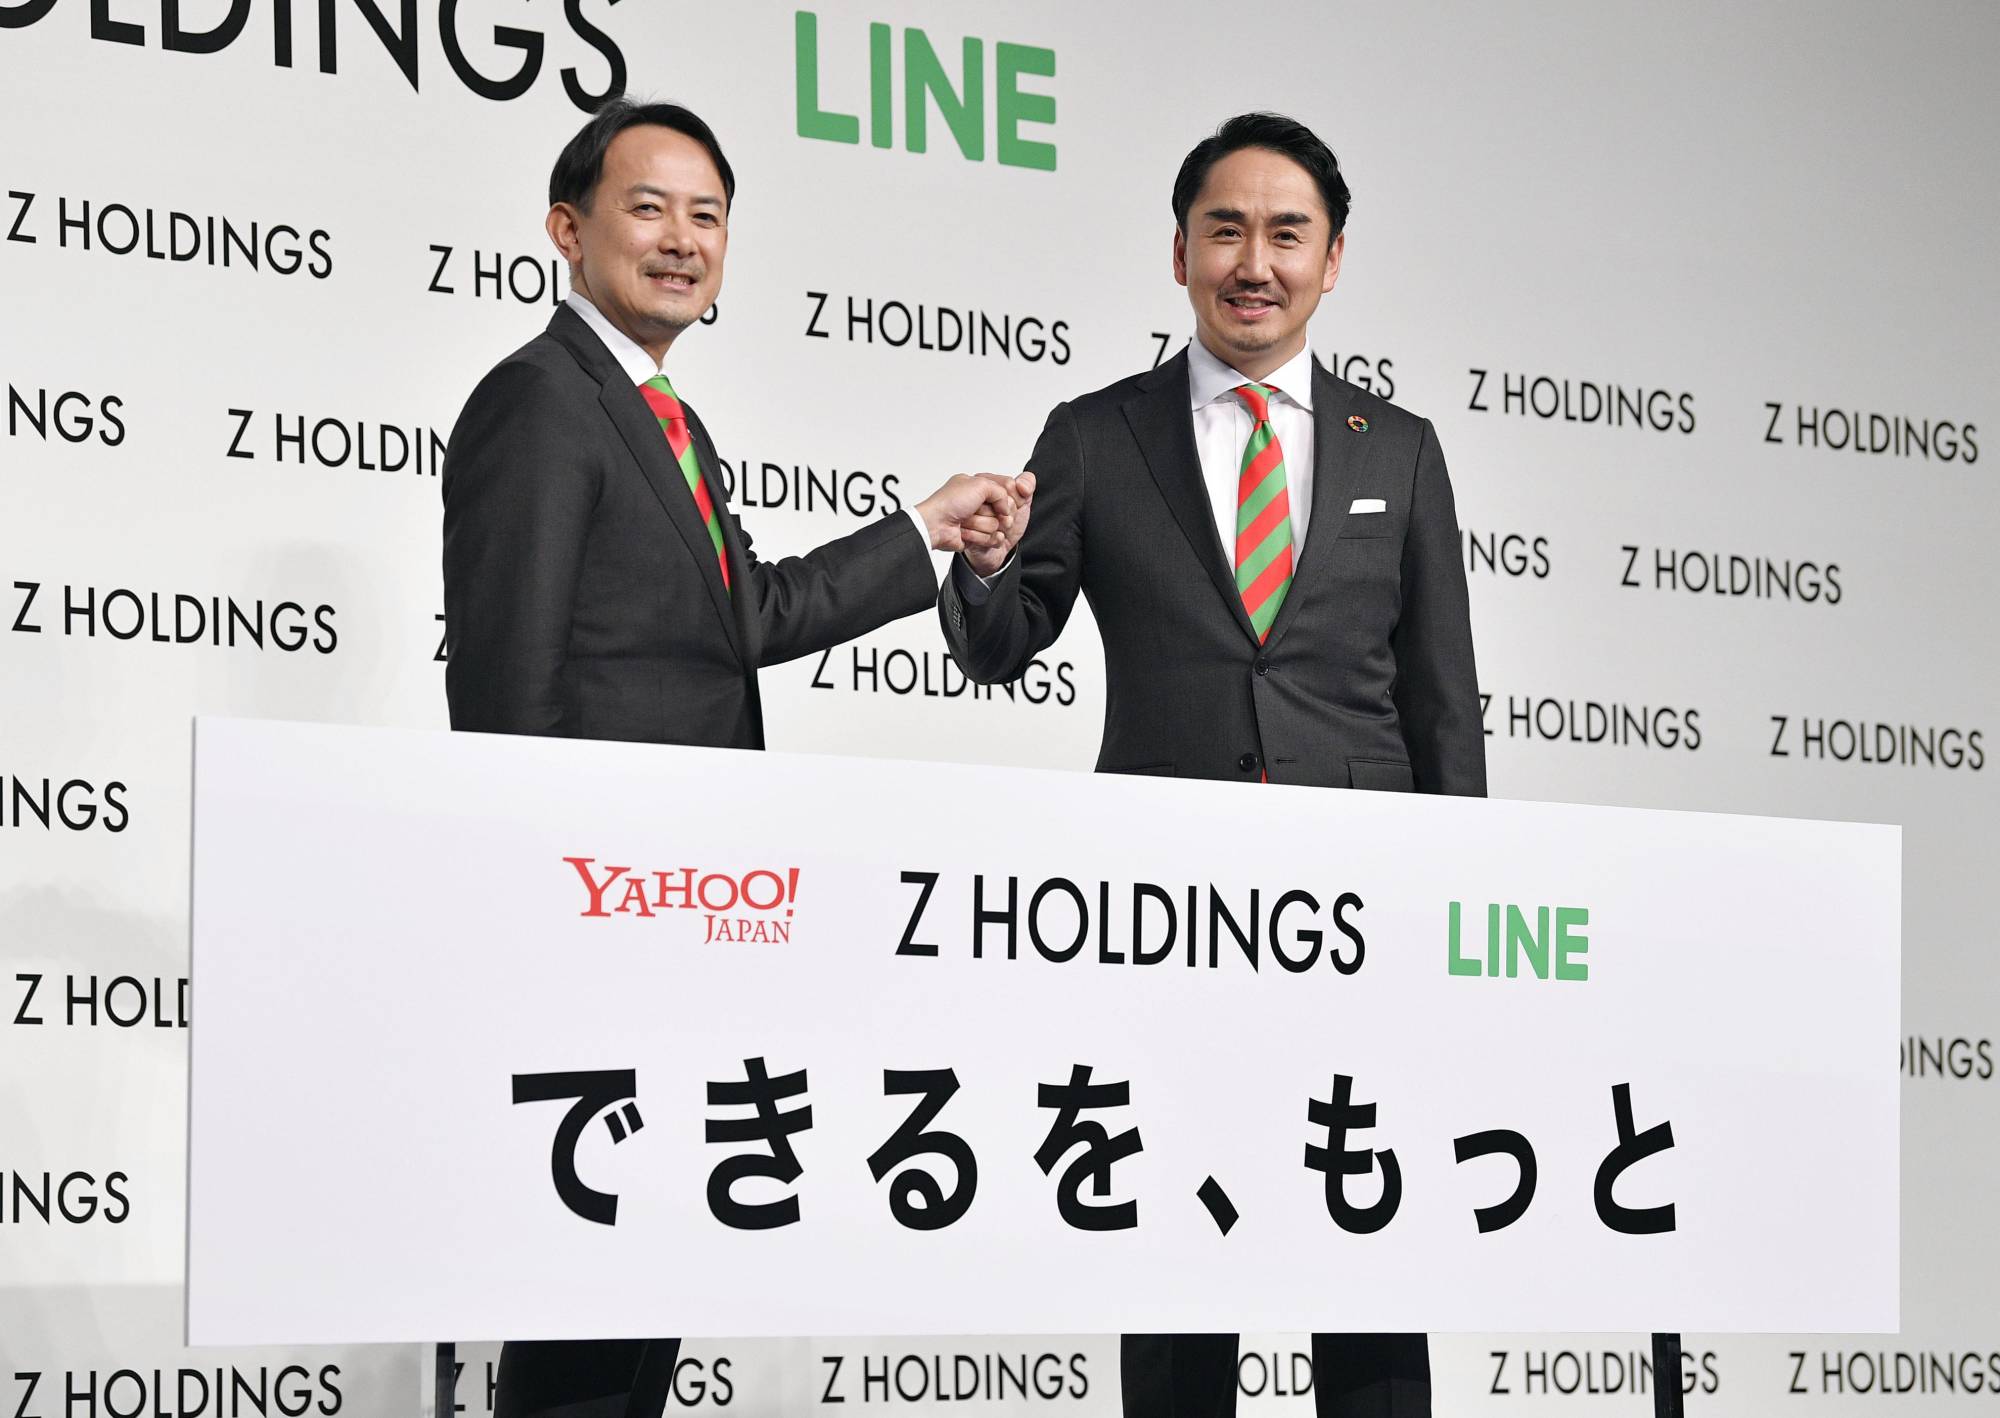 Merging Line and Yahoo! Ads Japan